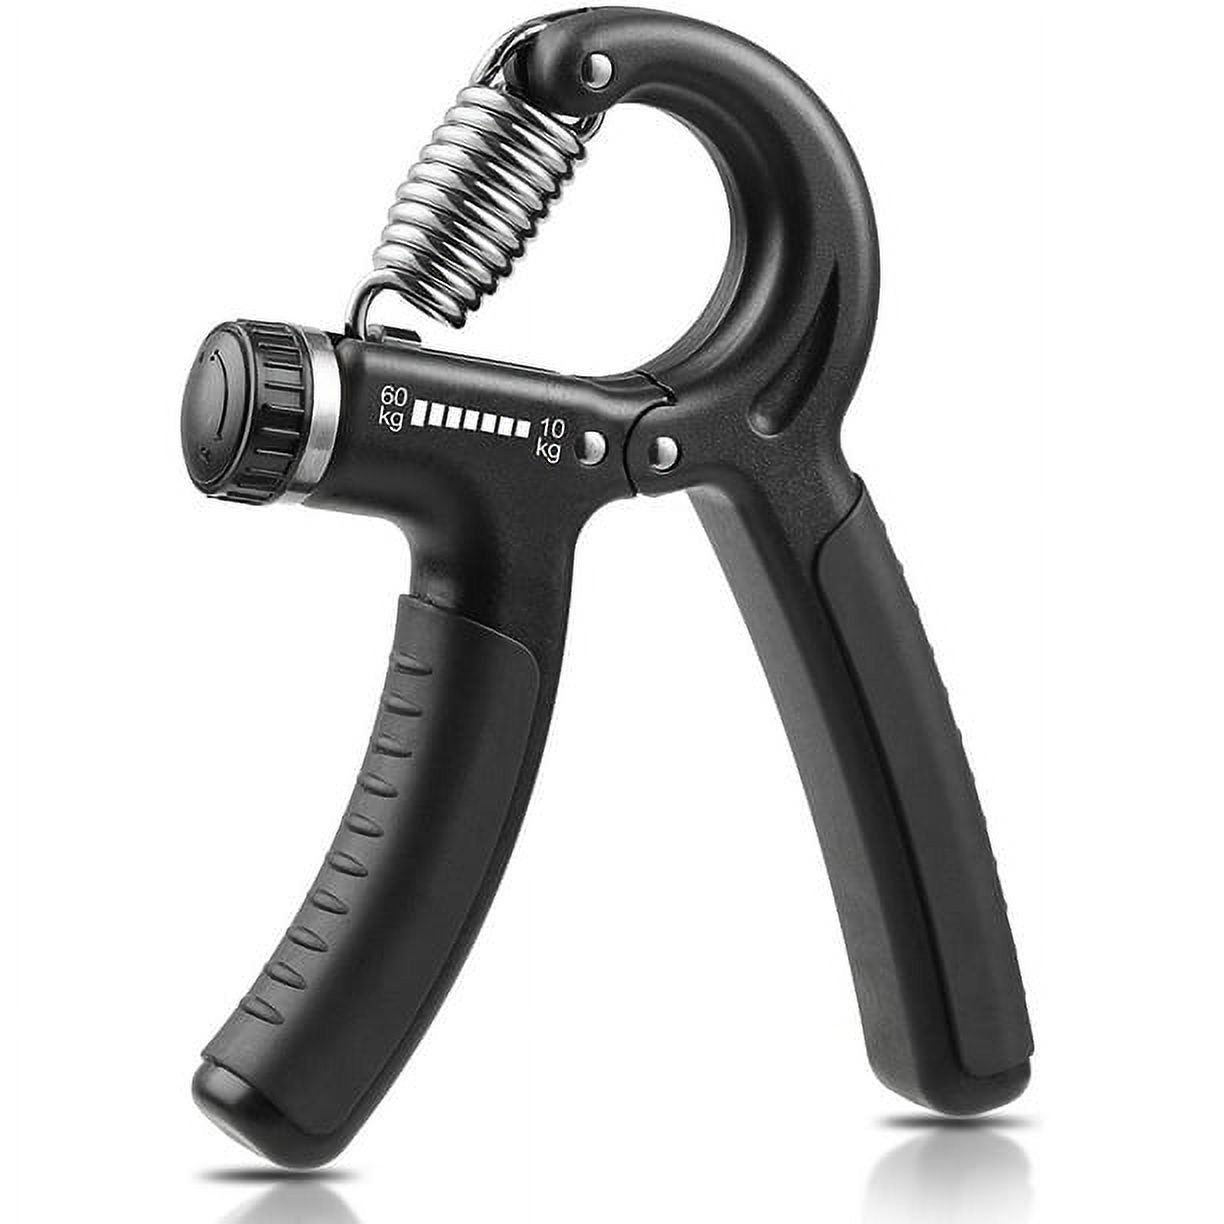 Upgrade Grip Strength Trainer,Hand Grip Strengthener, Adjustable Resistance 22-132Lbs (10-60kg), Non-Slip Gripper, Perfect for Musicians Athletes and Hand Rehabilitation Exercising - image 1 of 7